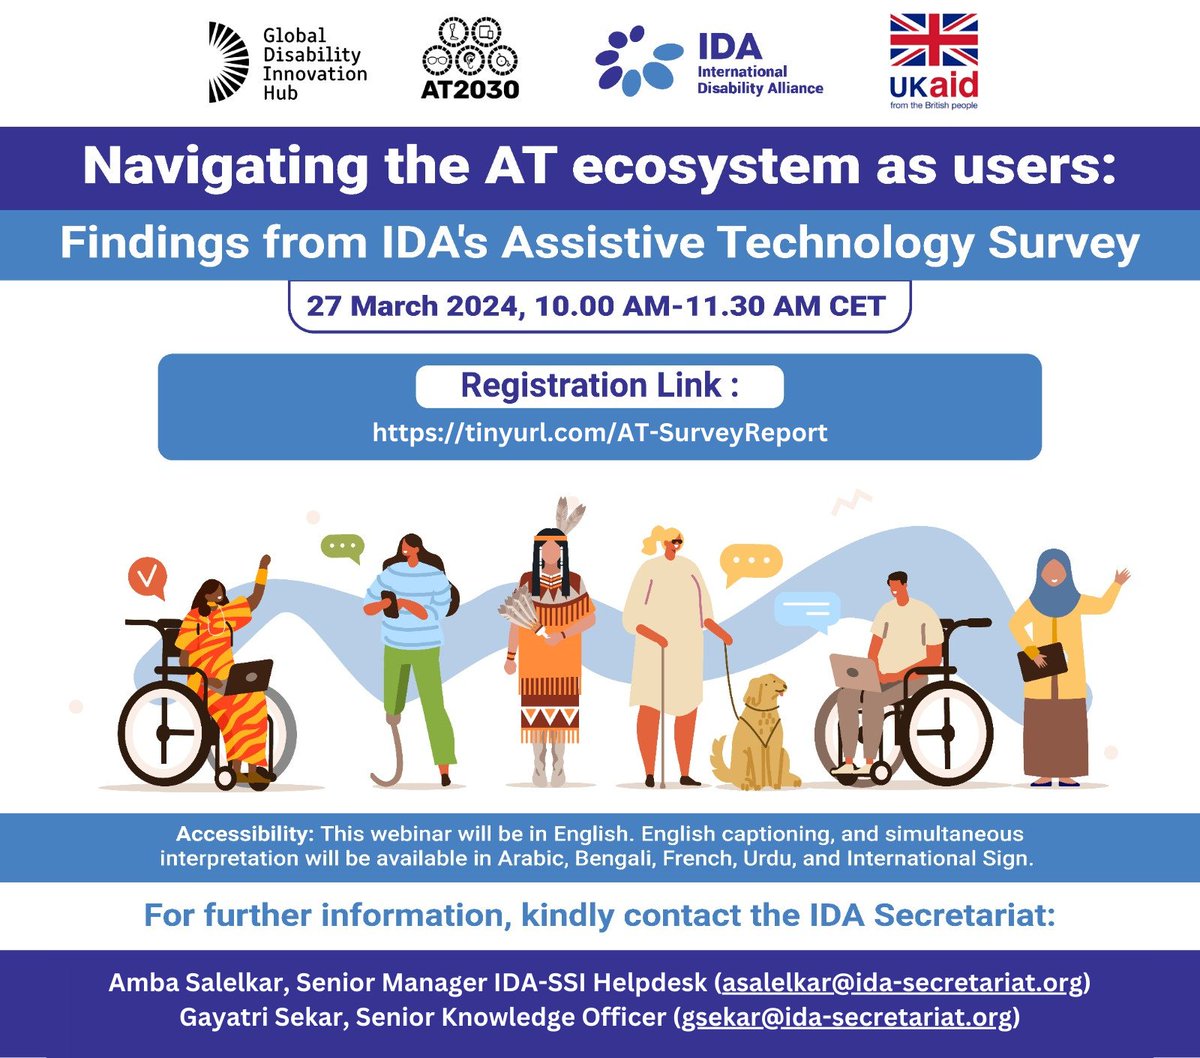 Our celebration of #AssistiveTechnology continues with the launch of the report on IDA's AT Survey! Join @IDA_CRPD_Forum, @GDIHub & ATscale to discover: 1️⃣Survey findings 2️⃣Insights from AT actors on the findings 3️⃣Dialogue on prioritizing AT access 🔗 tinyurl.com/AT-SurveyReport